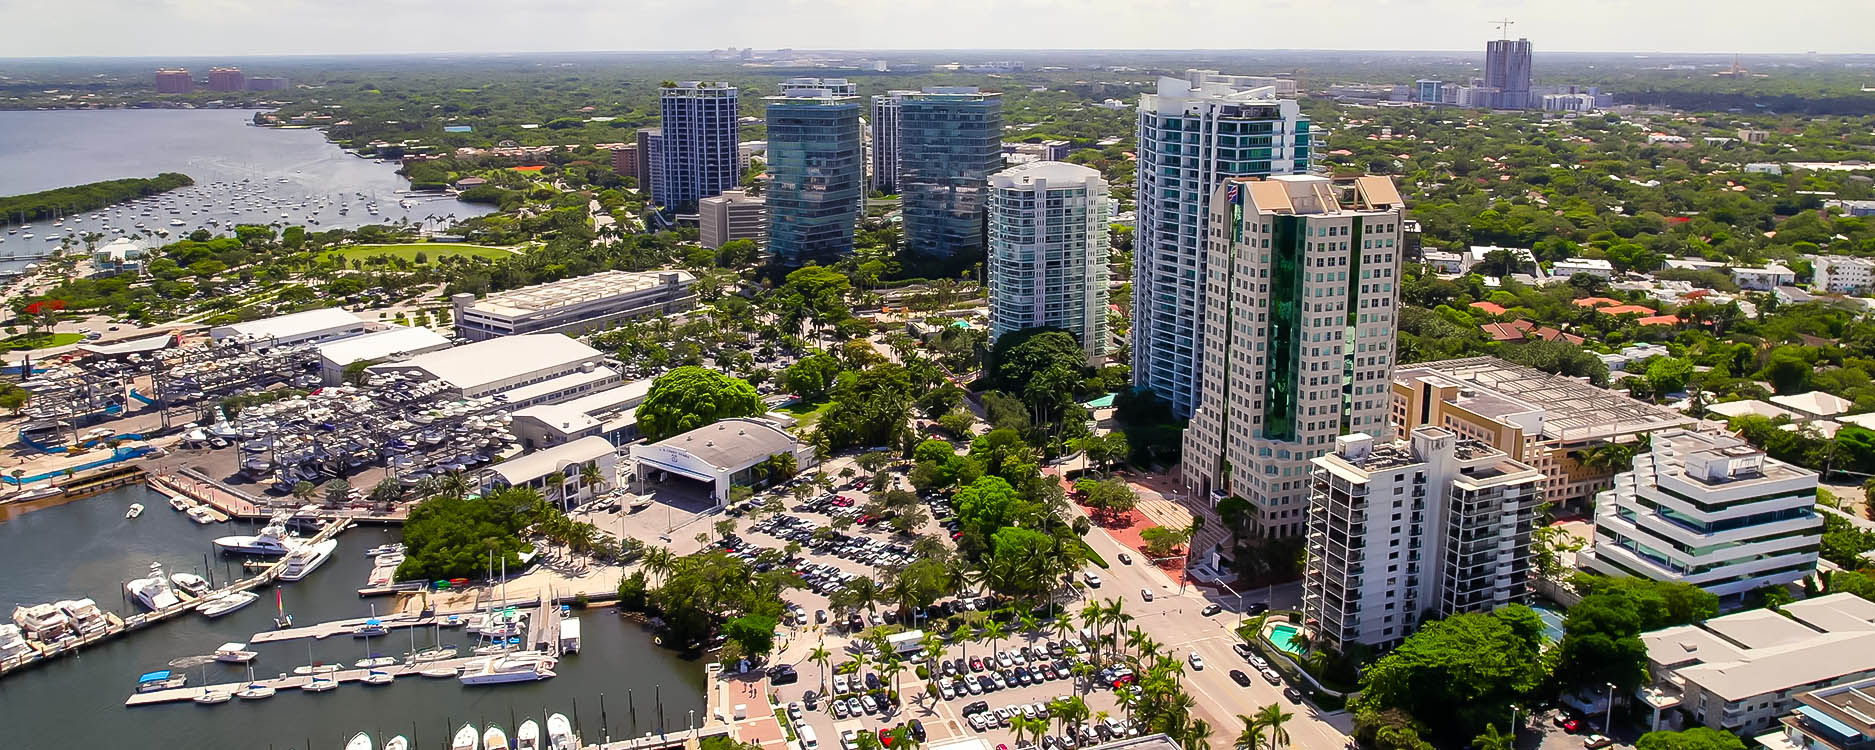 Coconut Grove Condos/Townhomes